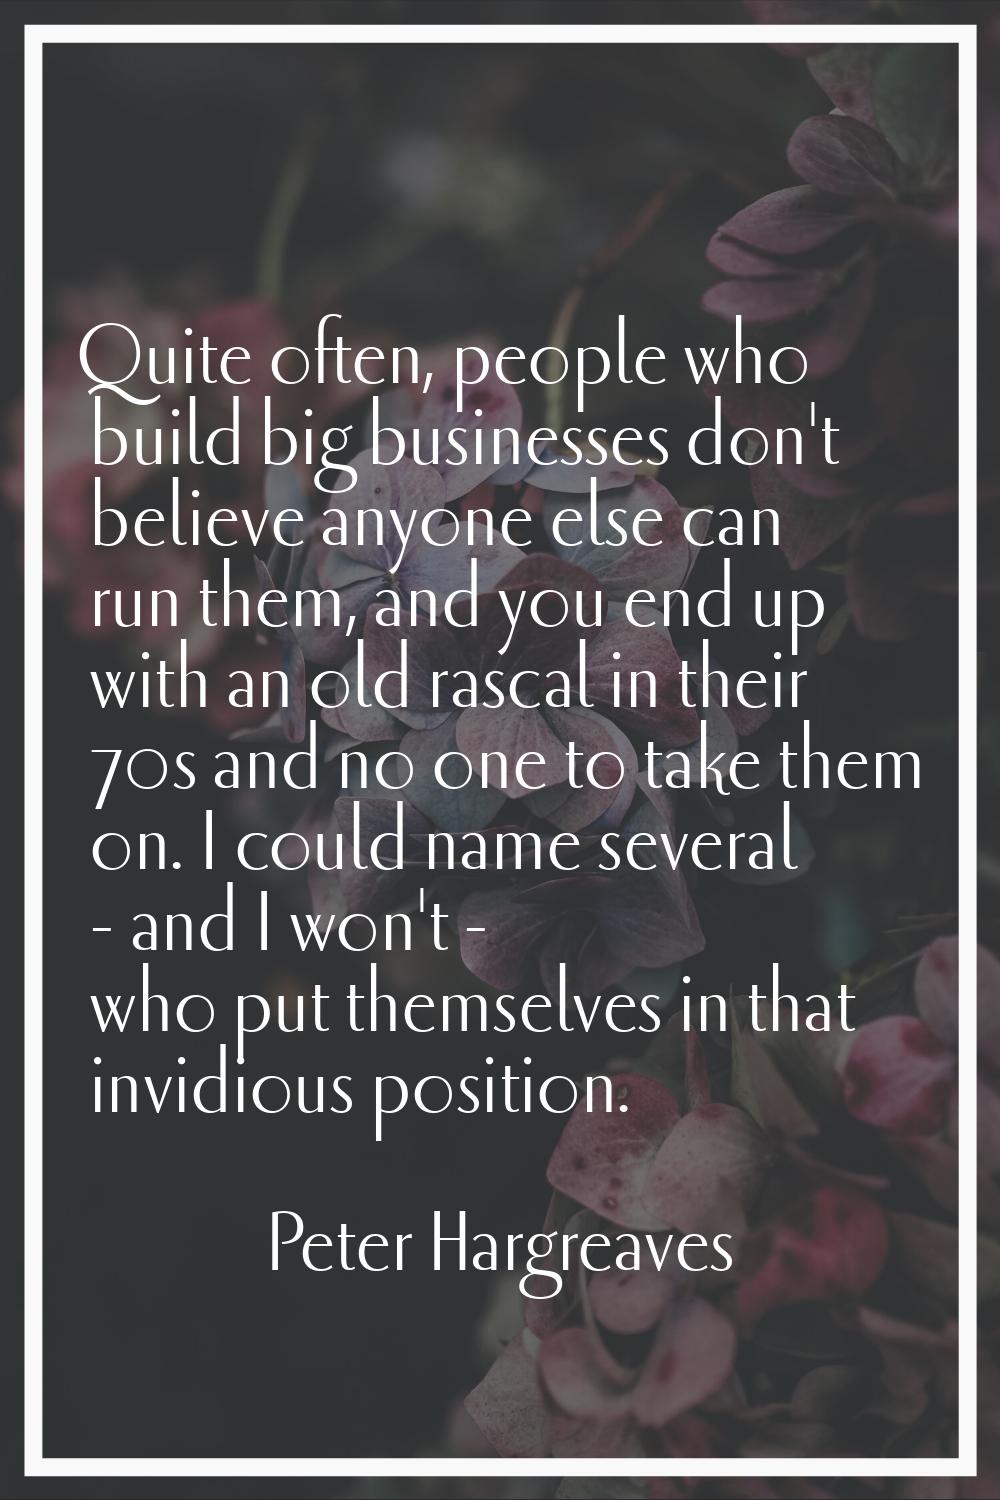 Quite often, people who build big businesses don't believe anyone else can run them, and you end up